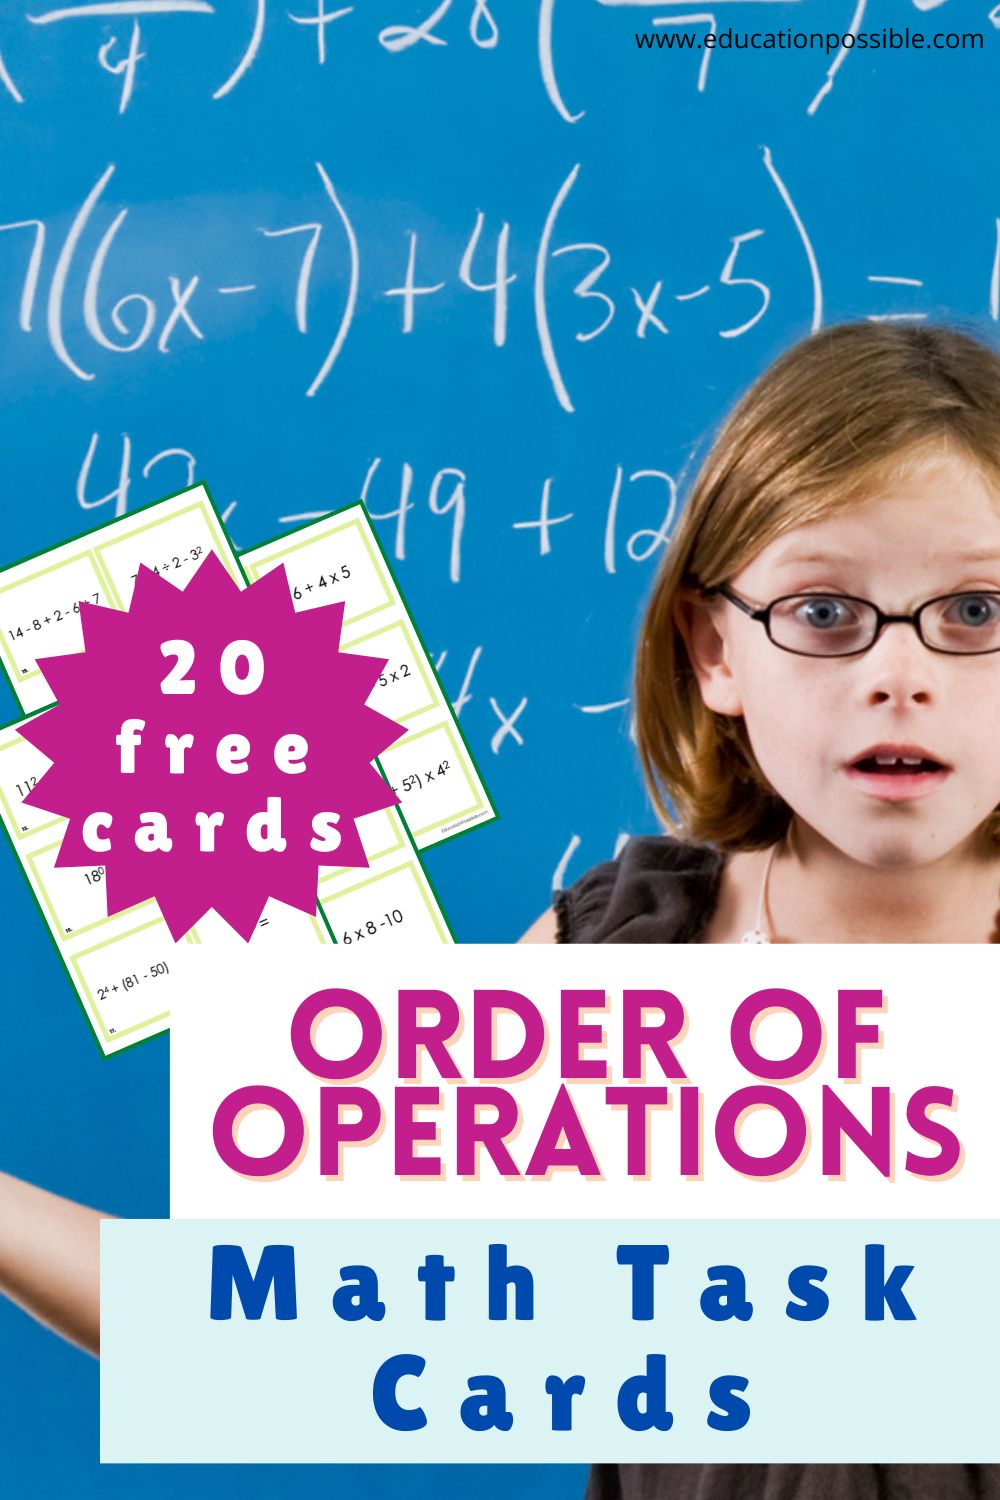 Elementary aged girl with black glasses standing in front of a blue board with math equations written on it. Images of pages of math task cards over the image on the side.